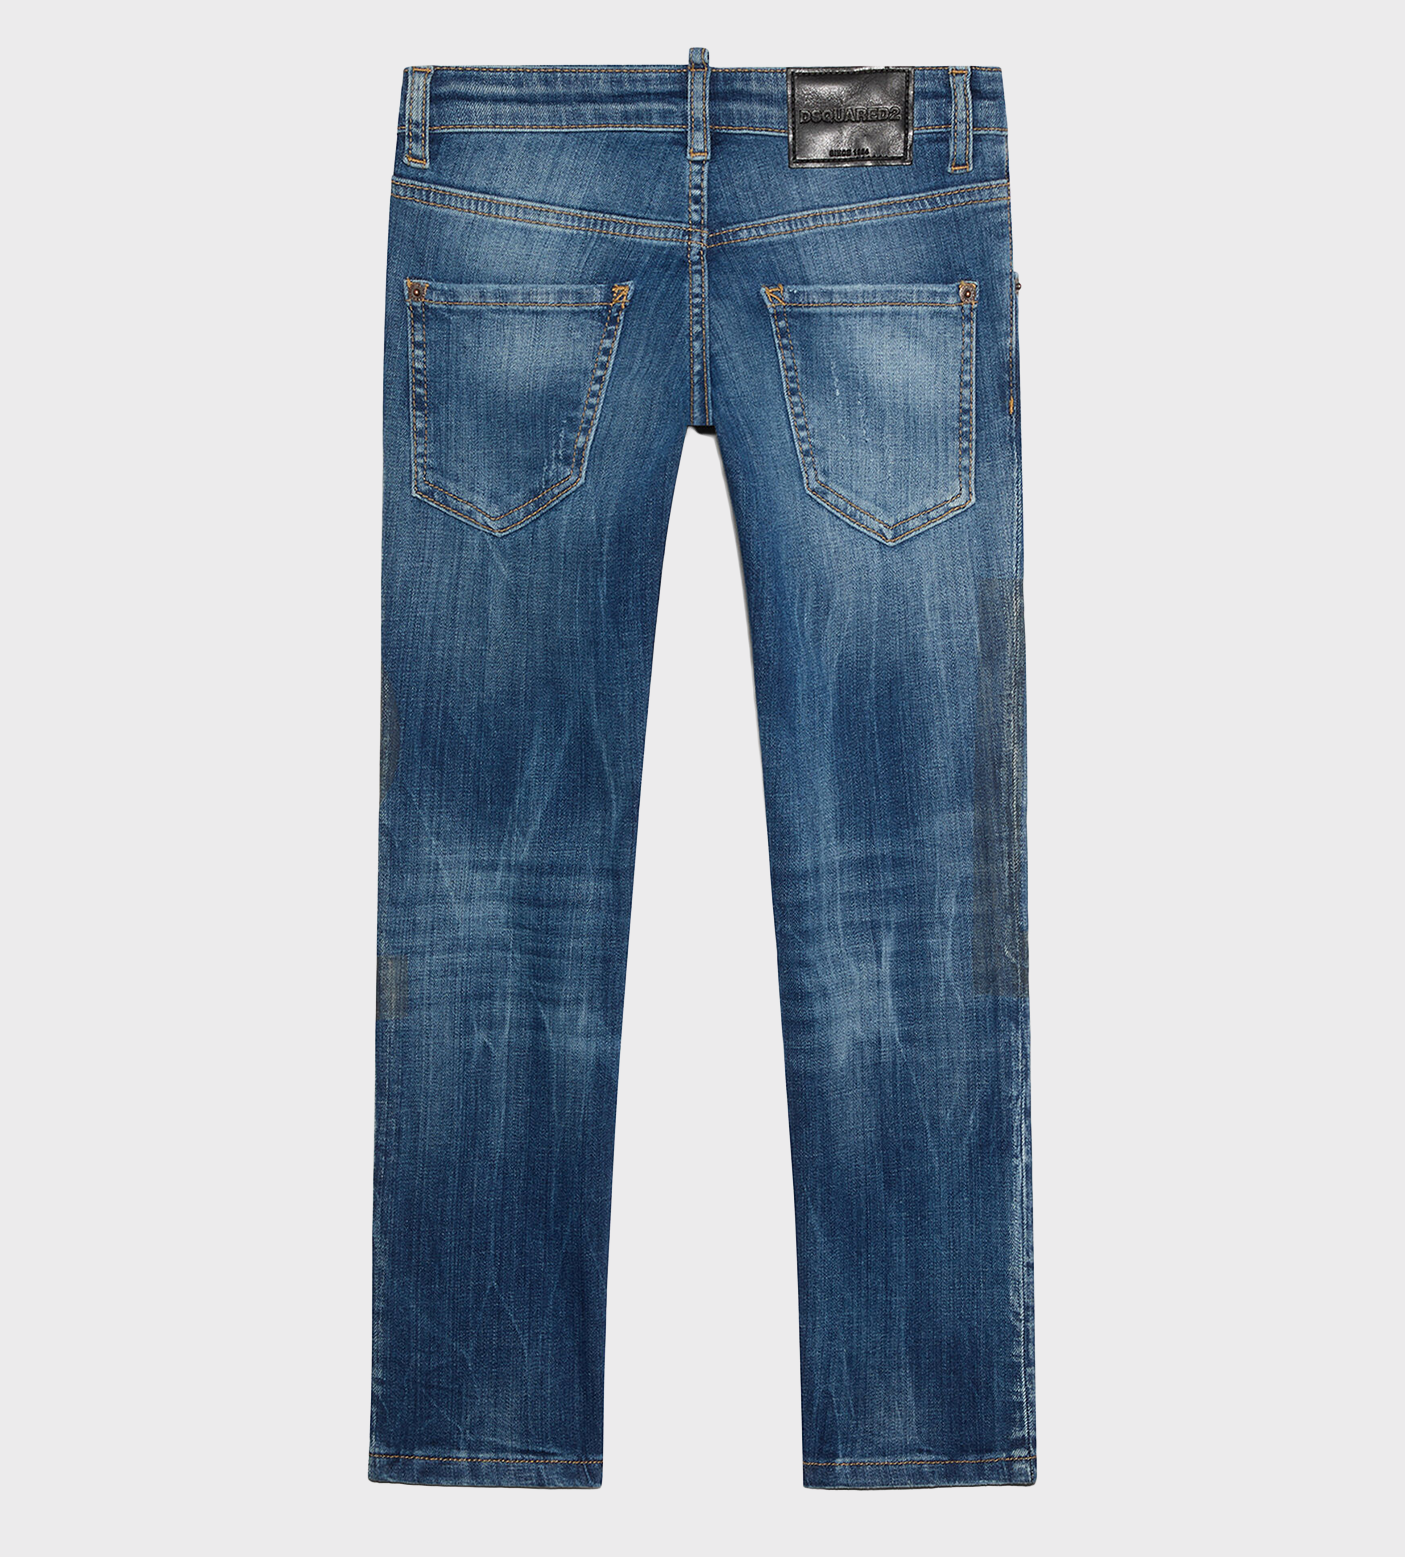 Cool Guy Distressed Skinny Jeans Blue